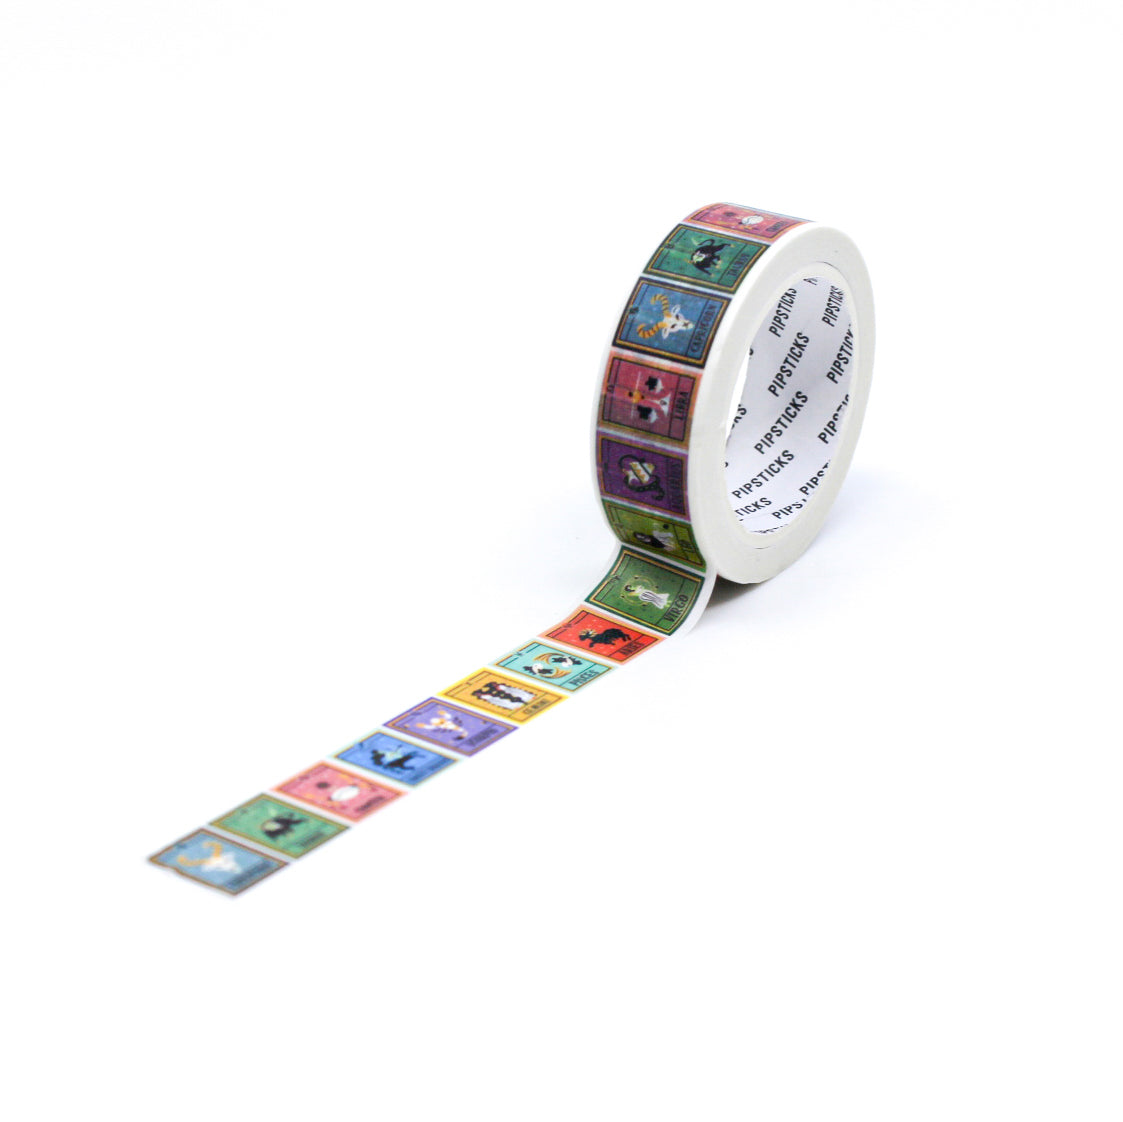 Discover your astrological destiny with our 'What's Your Sign' Zodiac Washi Tape, adorned with the twelve zodiac signs. Ideal for adding a touch of celestial mystique to your projects. This tape is from Pipsticks and sold at BBB Supplies Craft Shop.